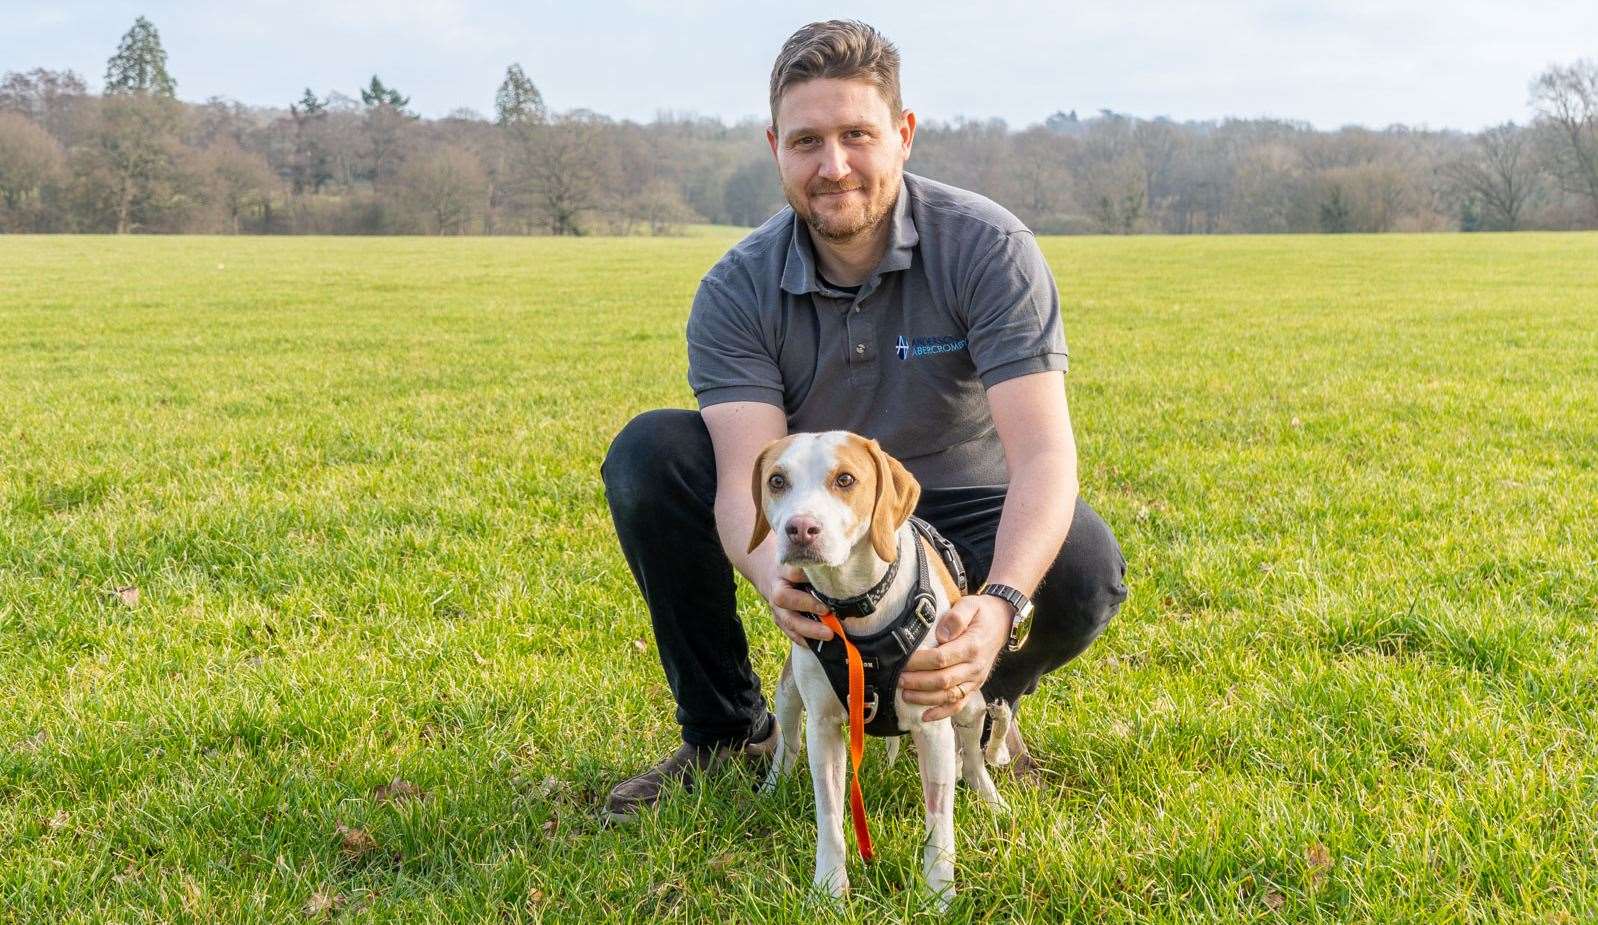 Ronnie, a beagle from Tunbridge Wells, was helped by surgeon Federico Piccino from Anderson Abercromby Veterinary Referrals